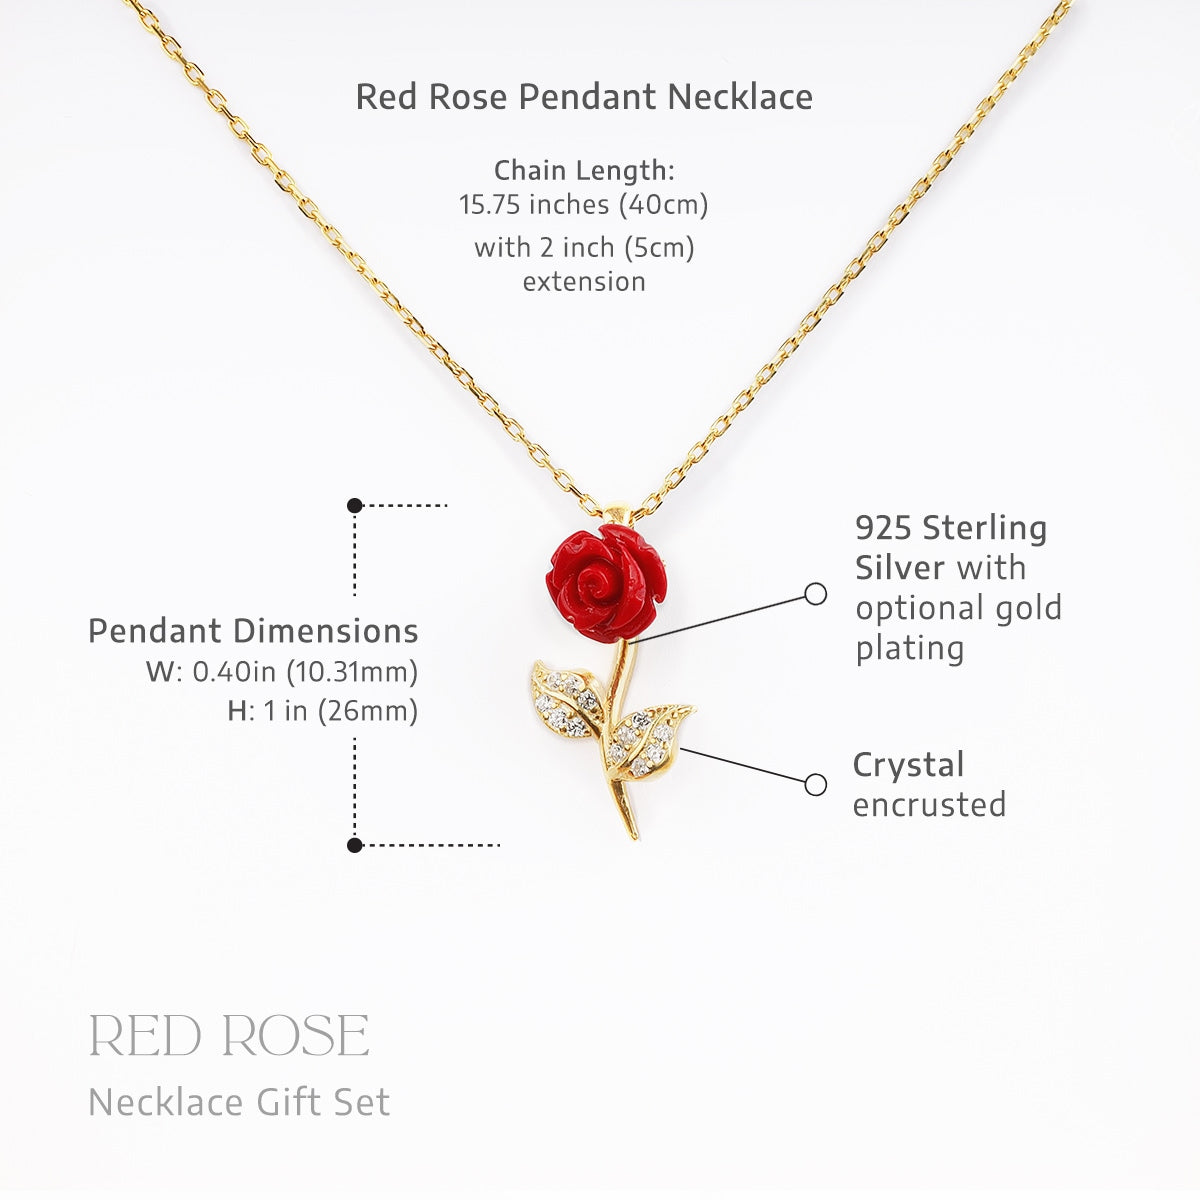 To My Daughter the Beauty, Life is Bittersweet - Red Rose Necklace Gift Set